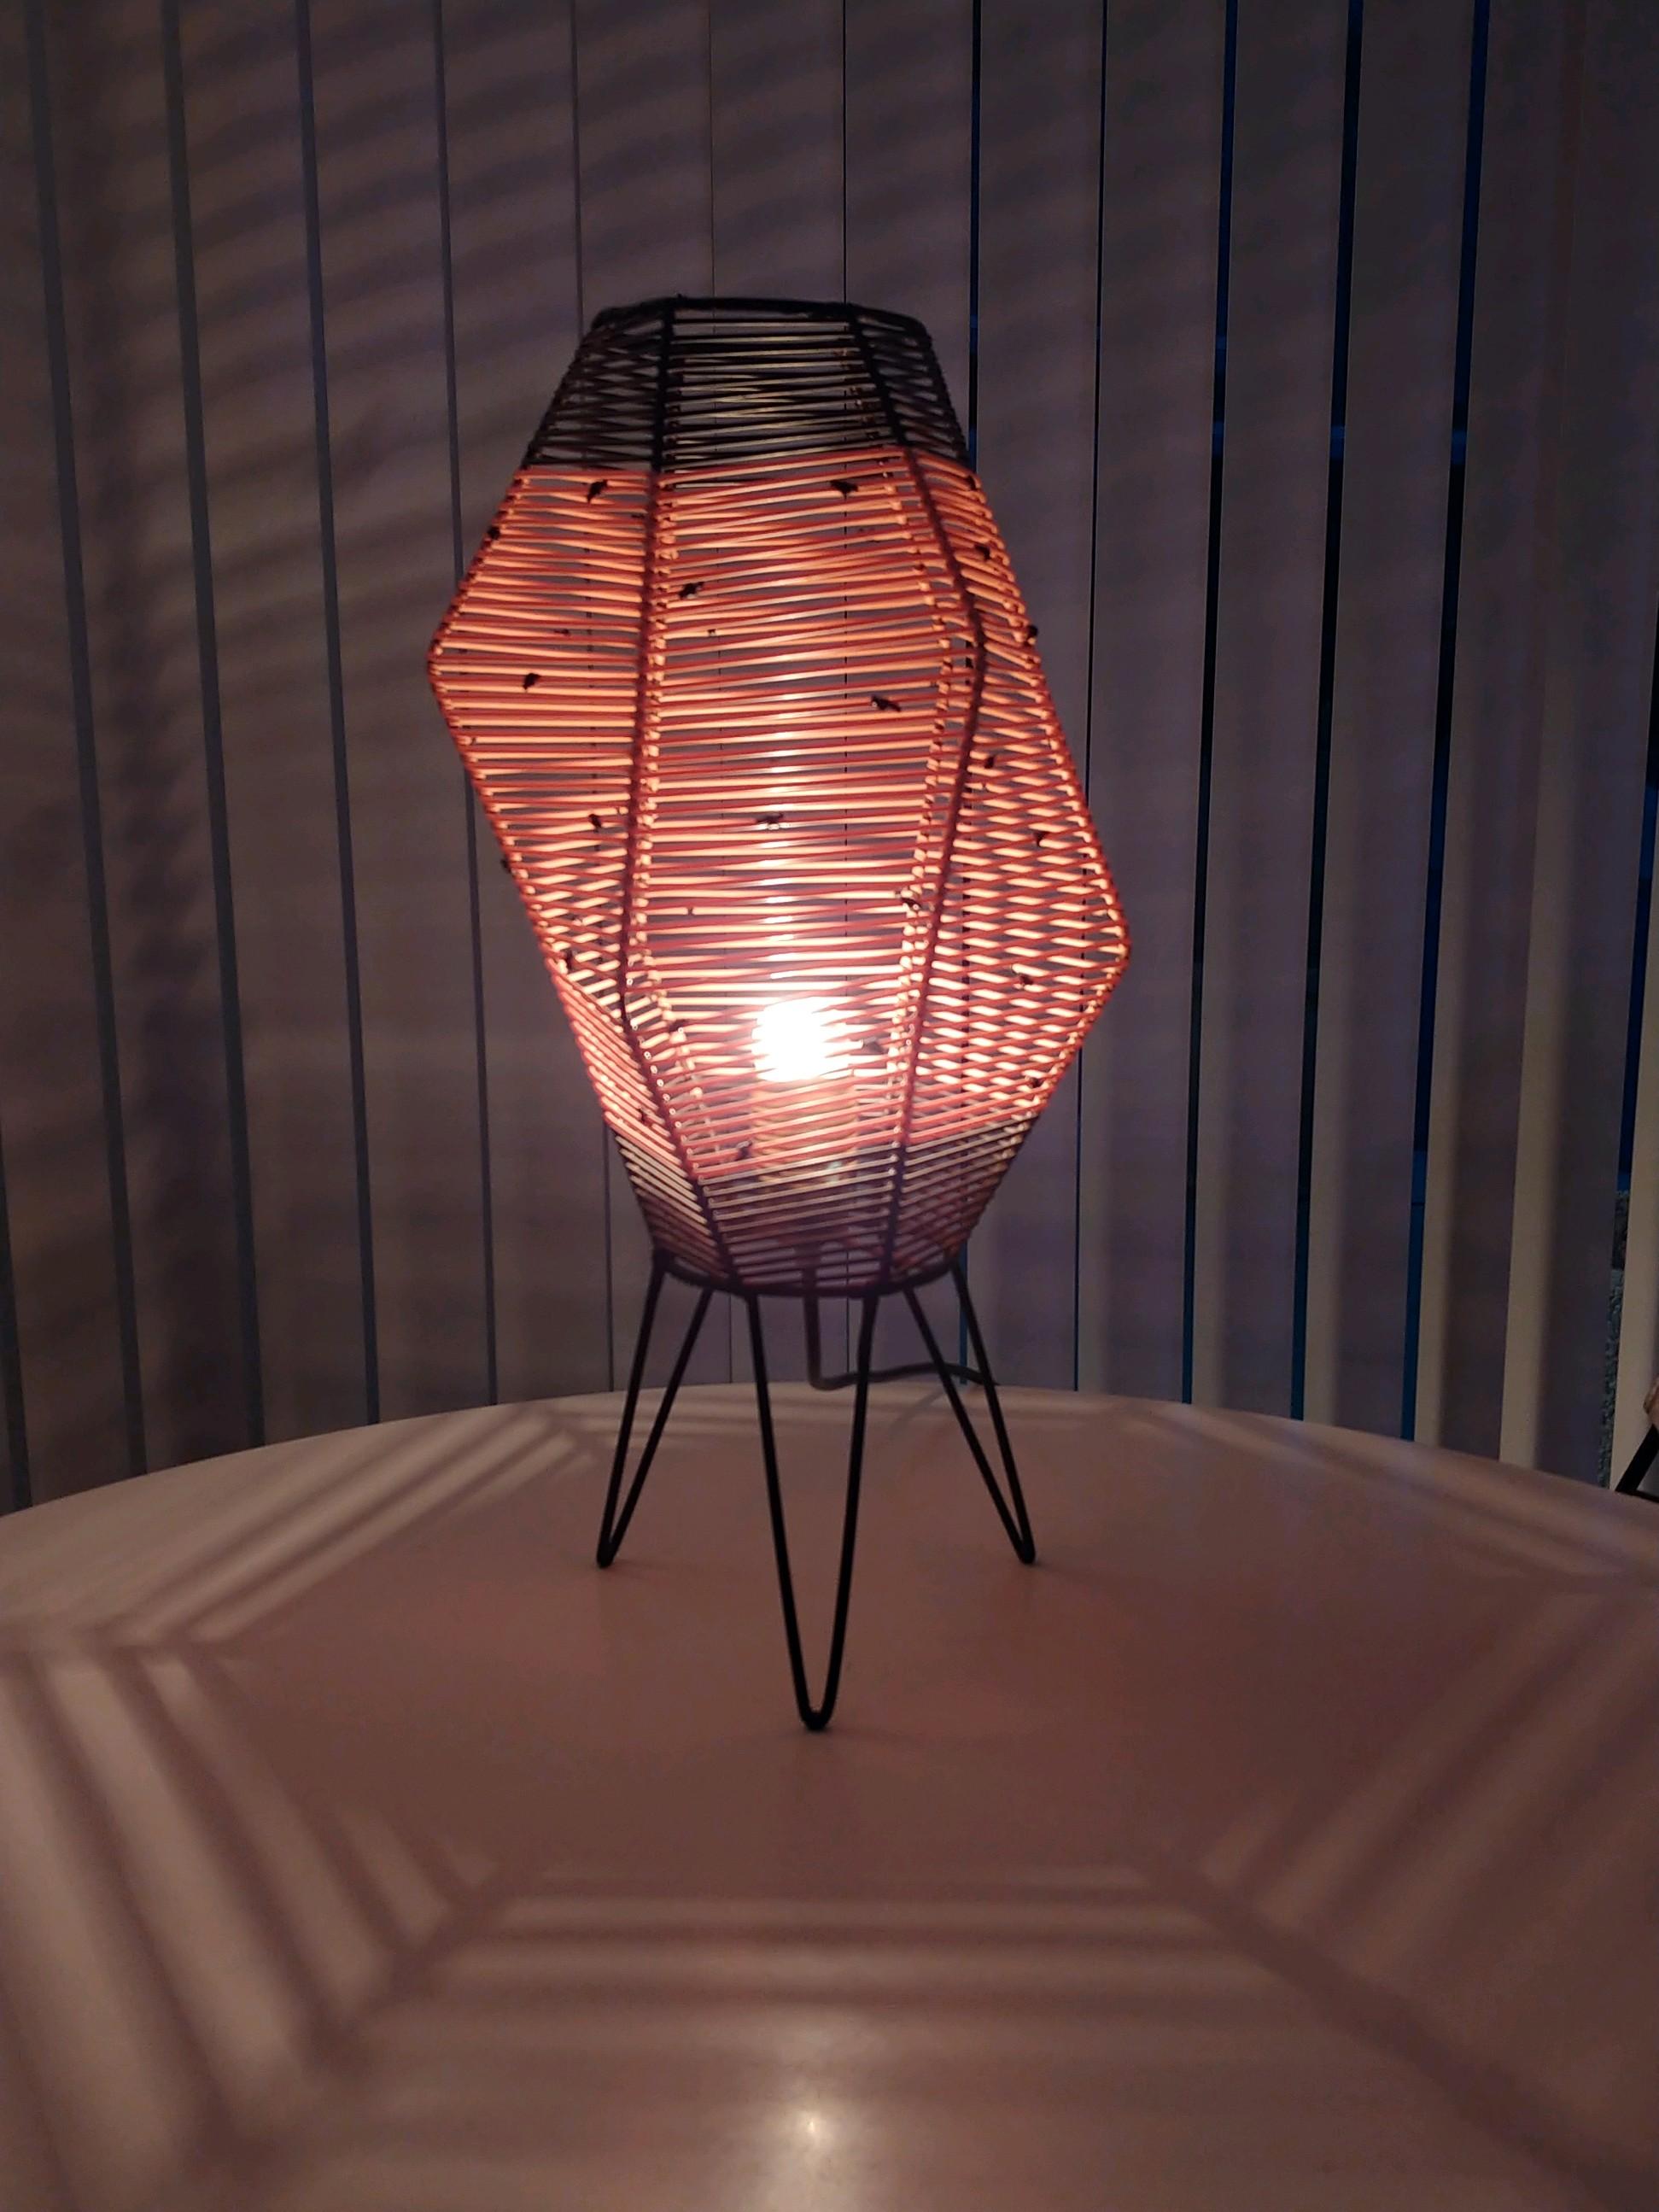 This asymmetrical wire frame lamp with hairpin legs is wound with pink and black nylon cord. When used with a clear bulb the light creates patterns on the table and on the walls. Nylon cord is 100% with no losses or damage. This lamp was found in